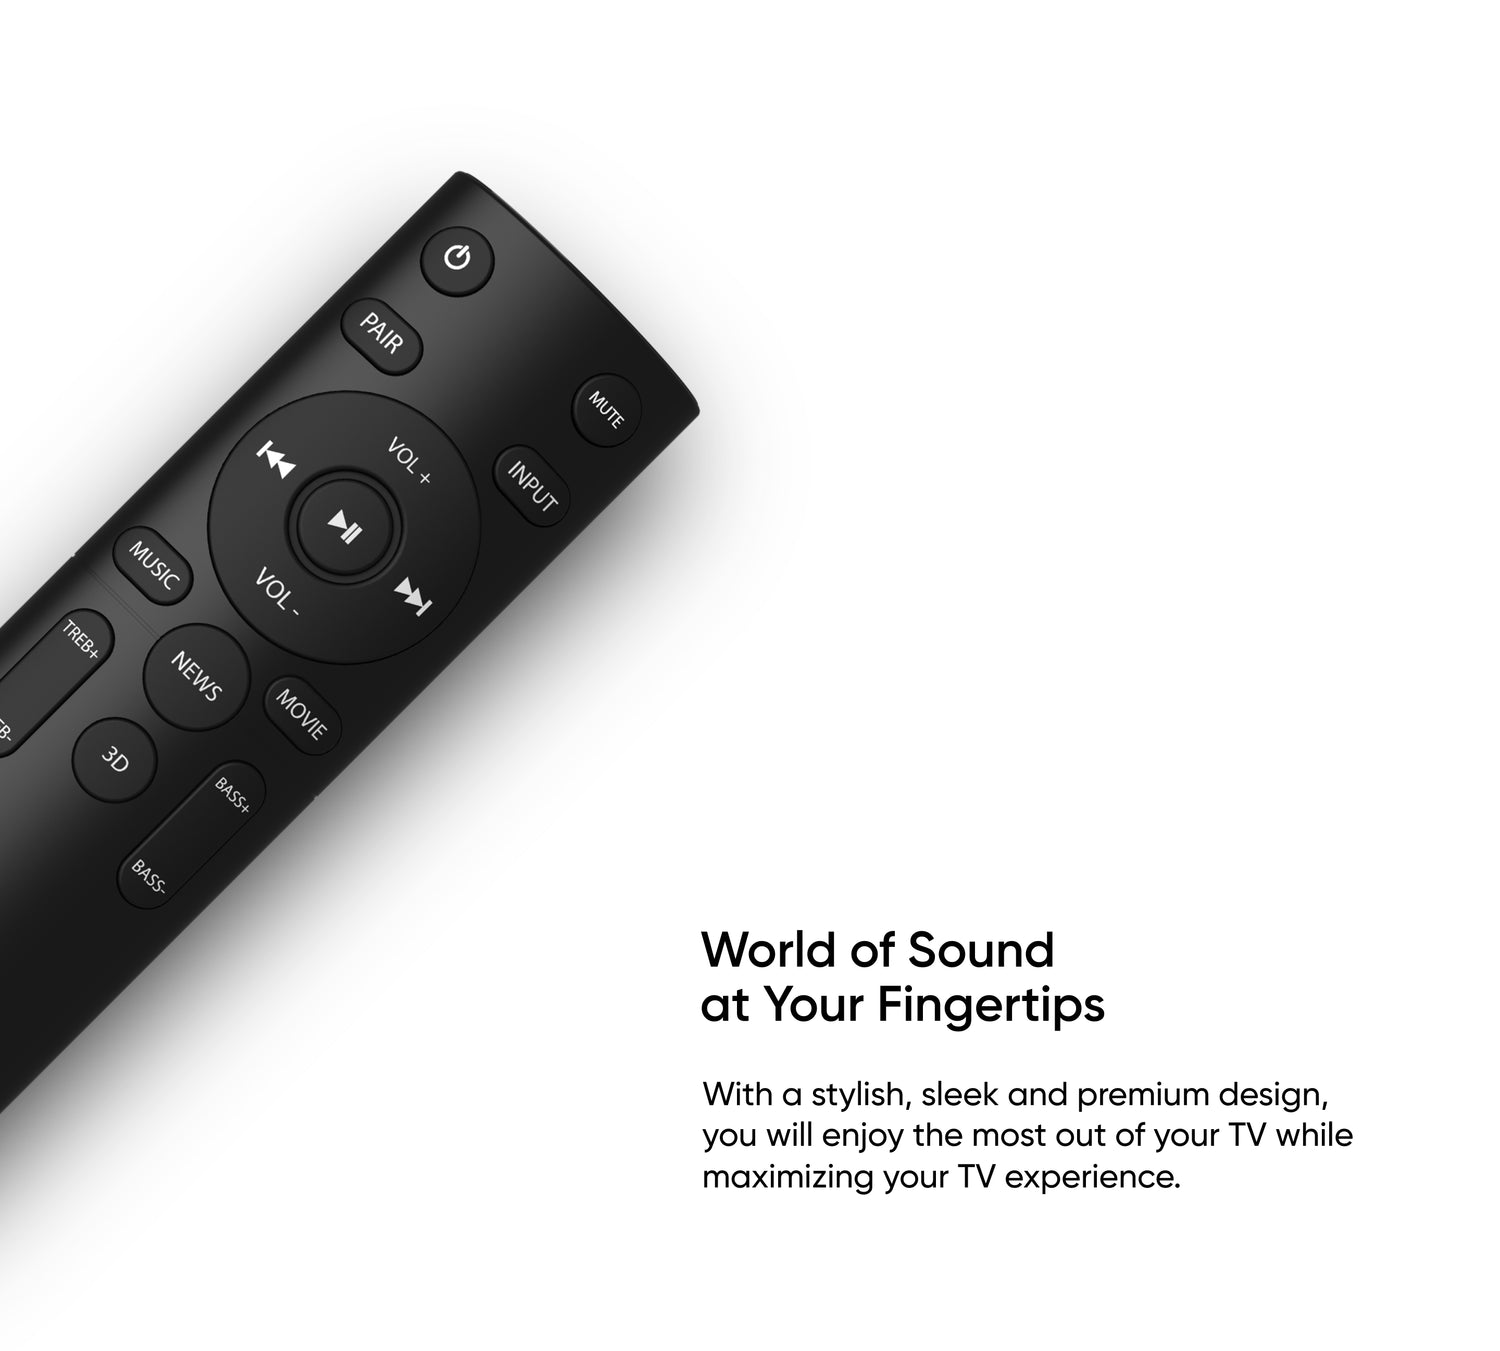 World of Sound at Your Fingertips - With a stylish, sleek and premium design, you will enjoy the most out of your TV while maximizing your TV experience.